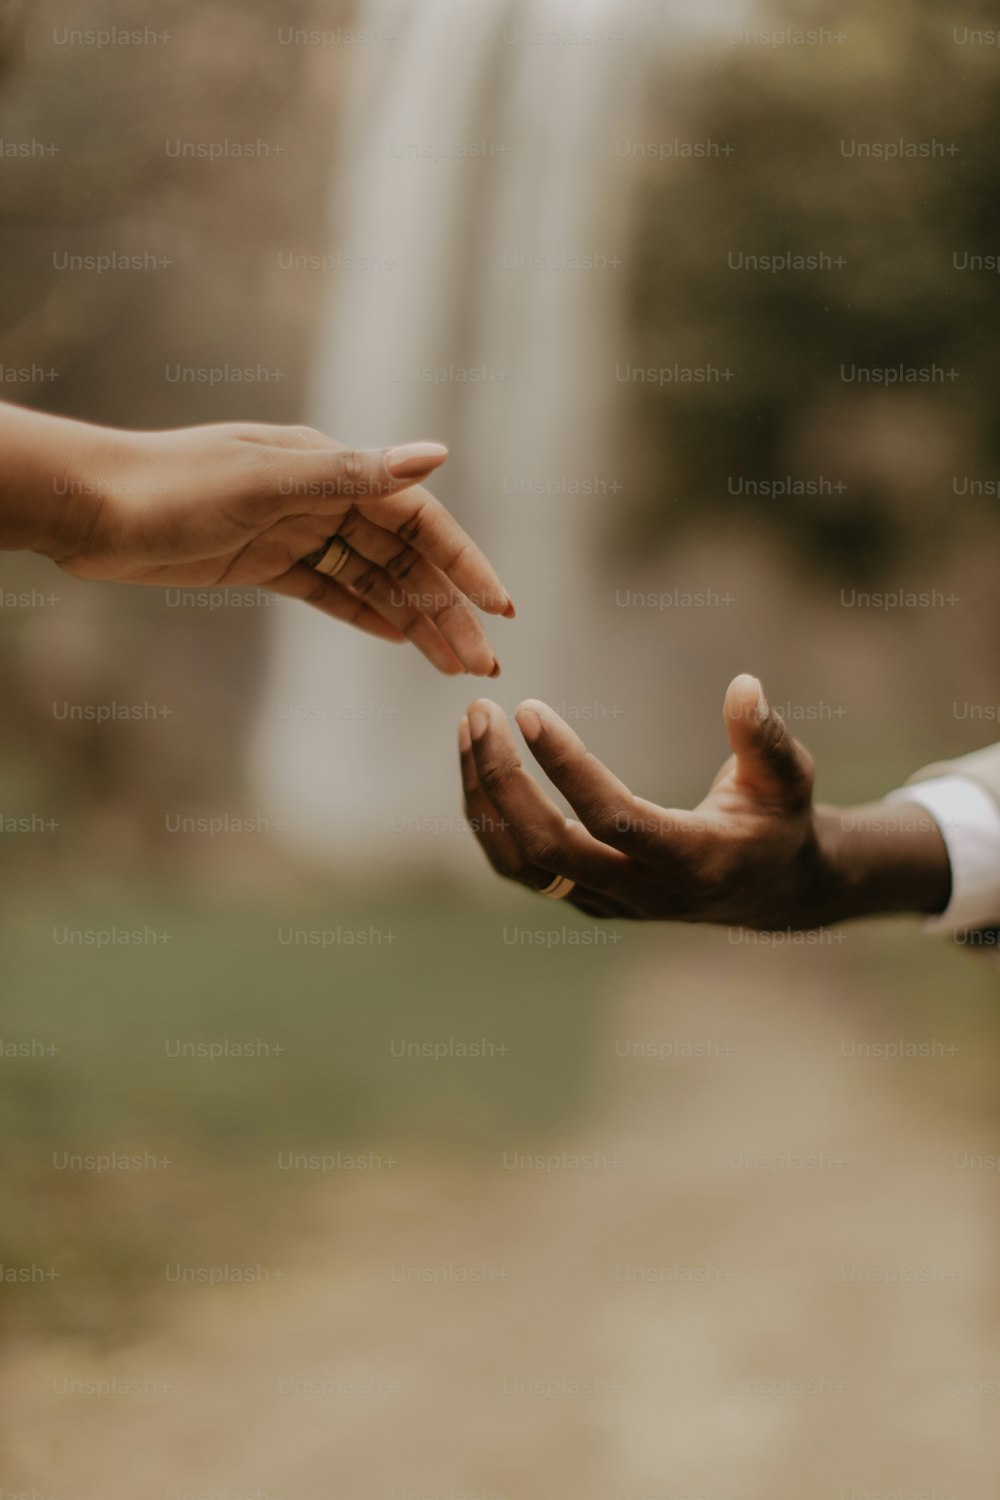 two people reaching out their hands to each other